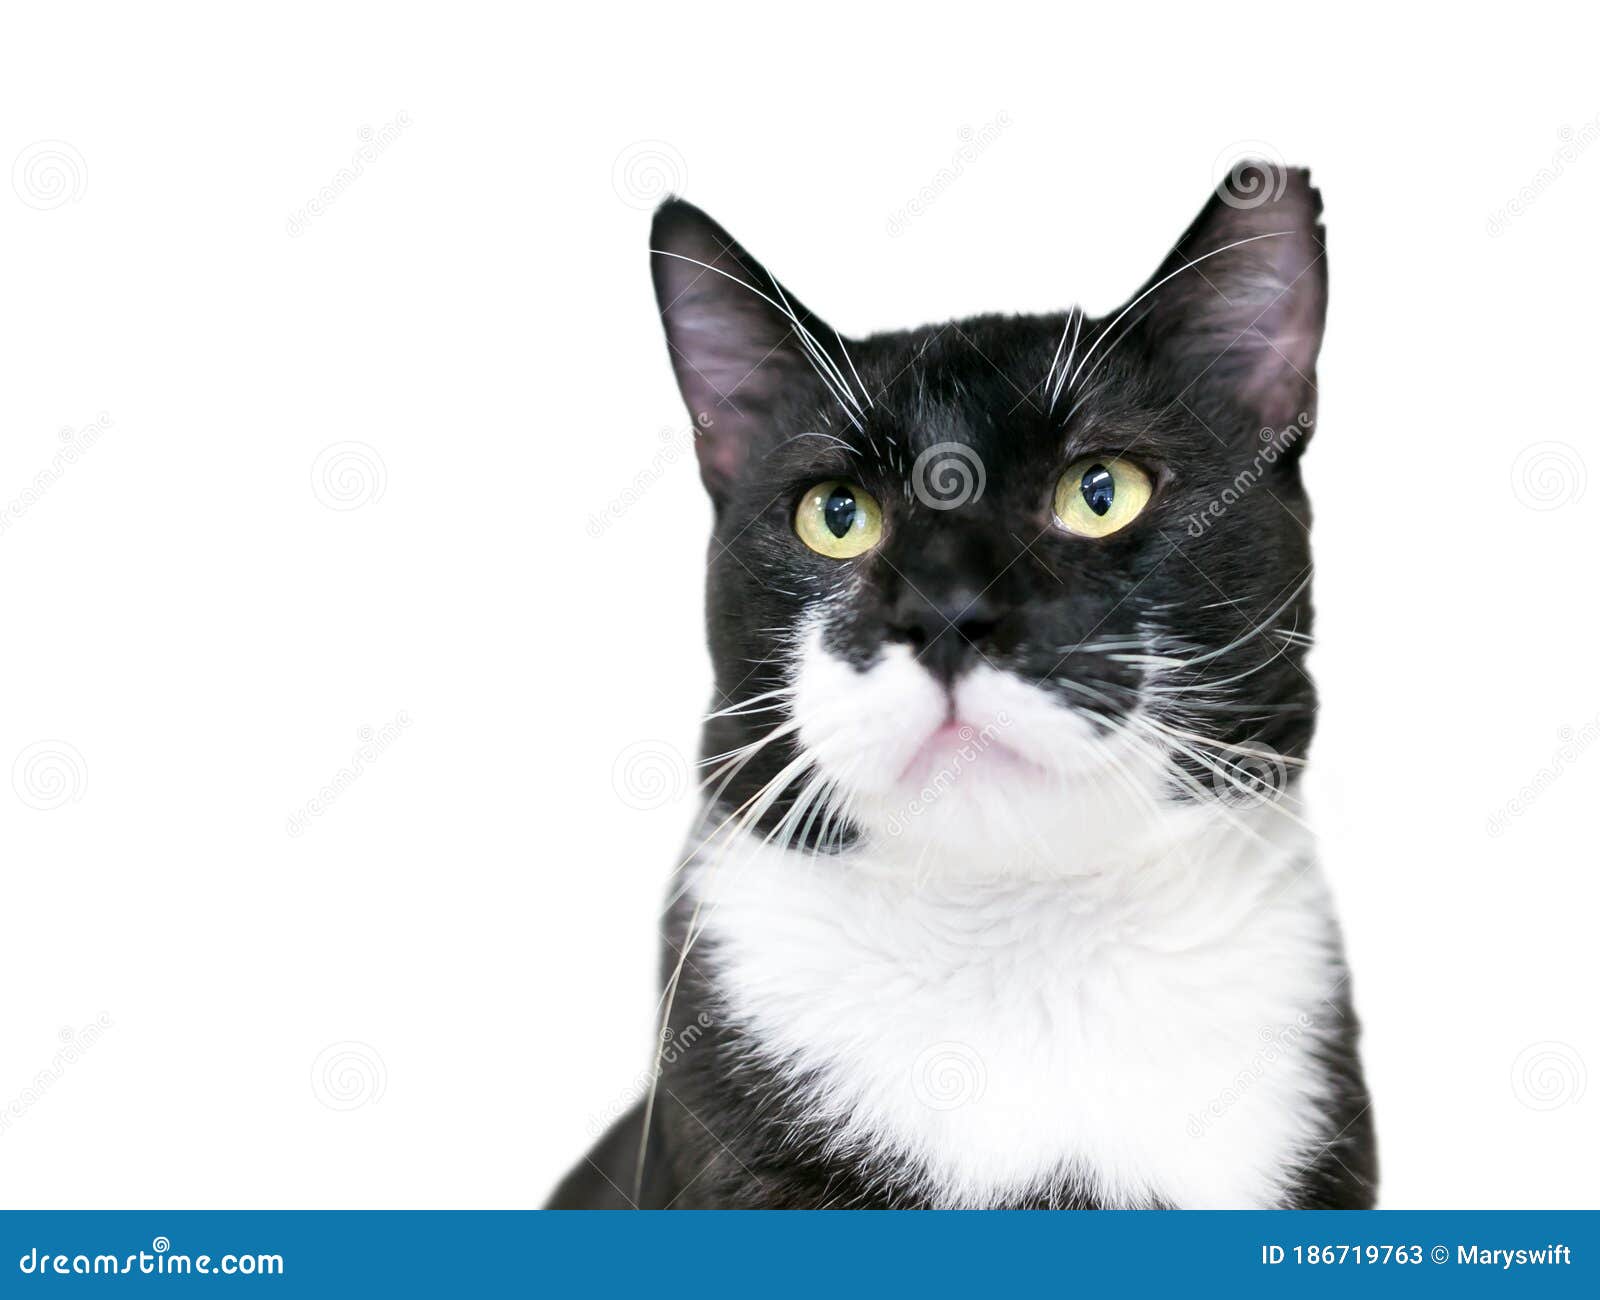 A Black And White Tuxedo Cat With Its Left Ear Tipped, Indicating That